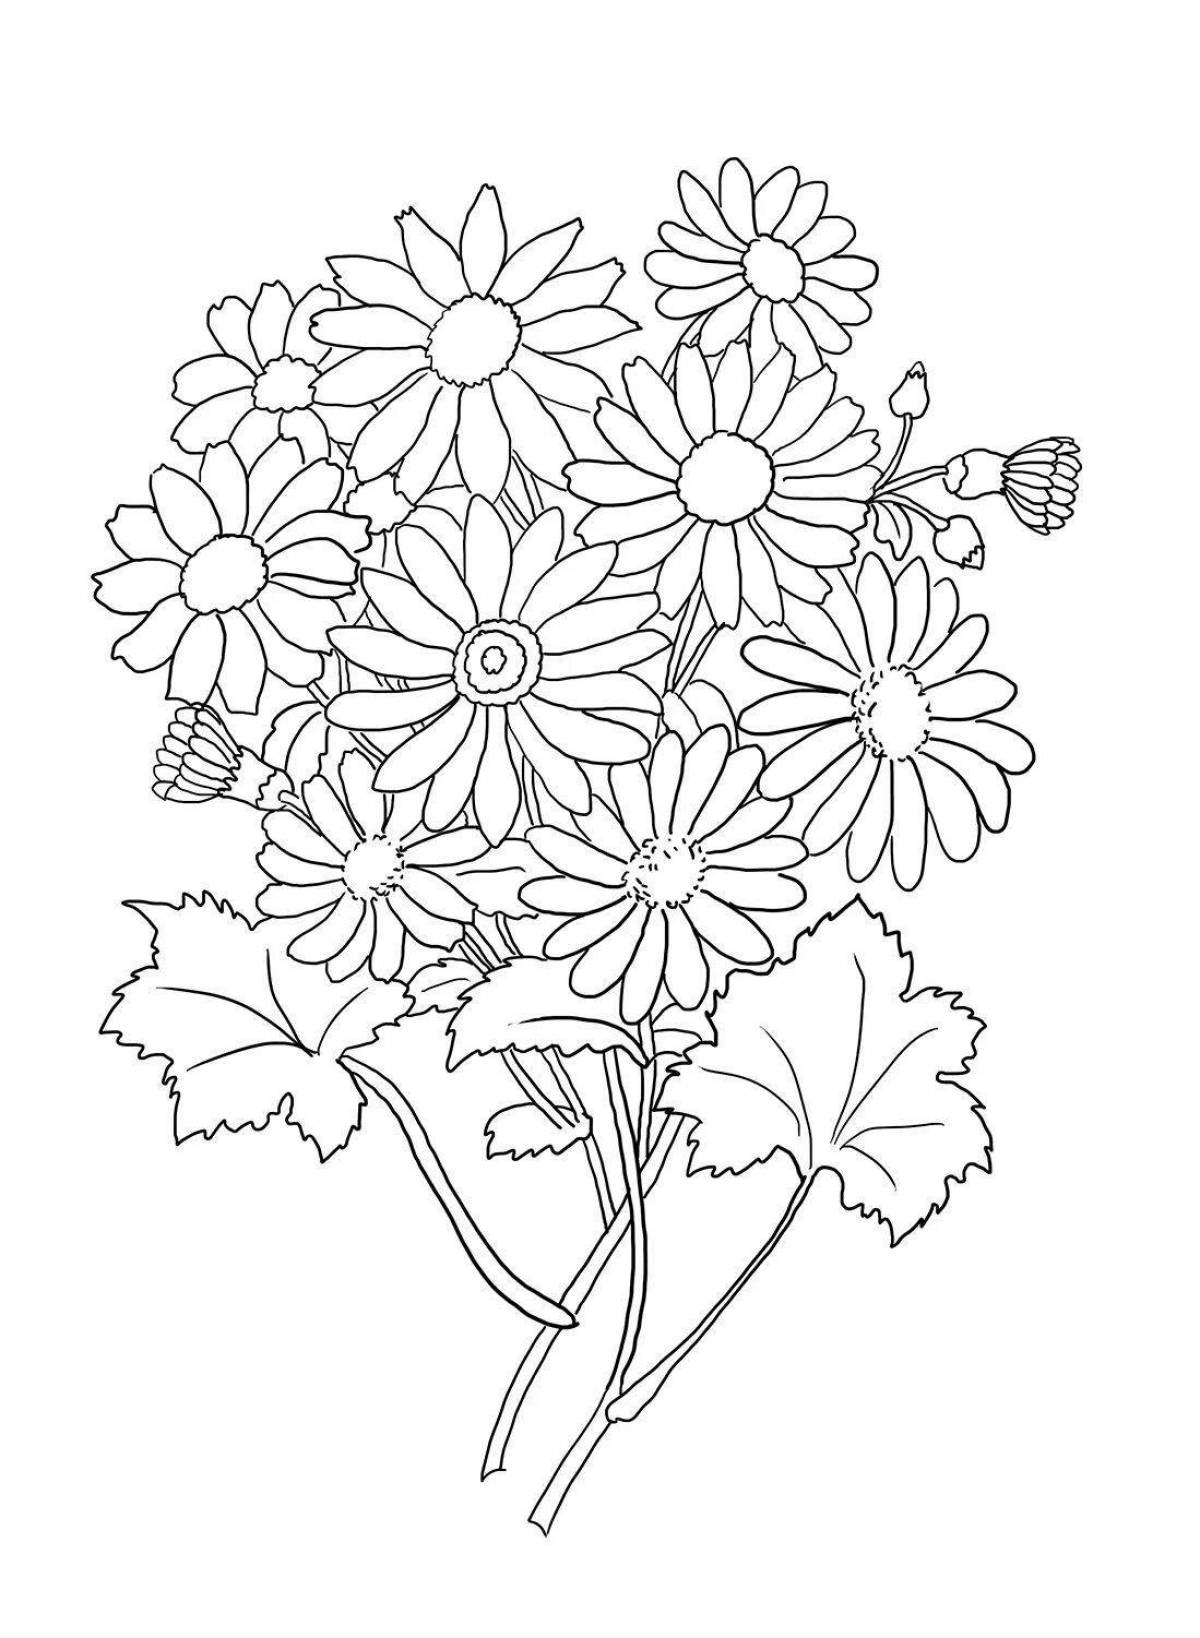 Coloring book magical bouquet of daisies